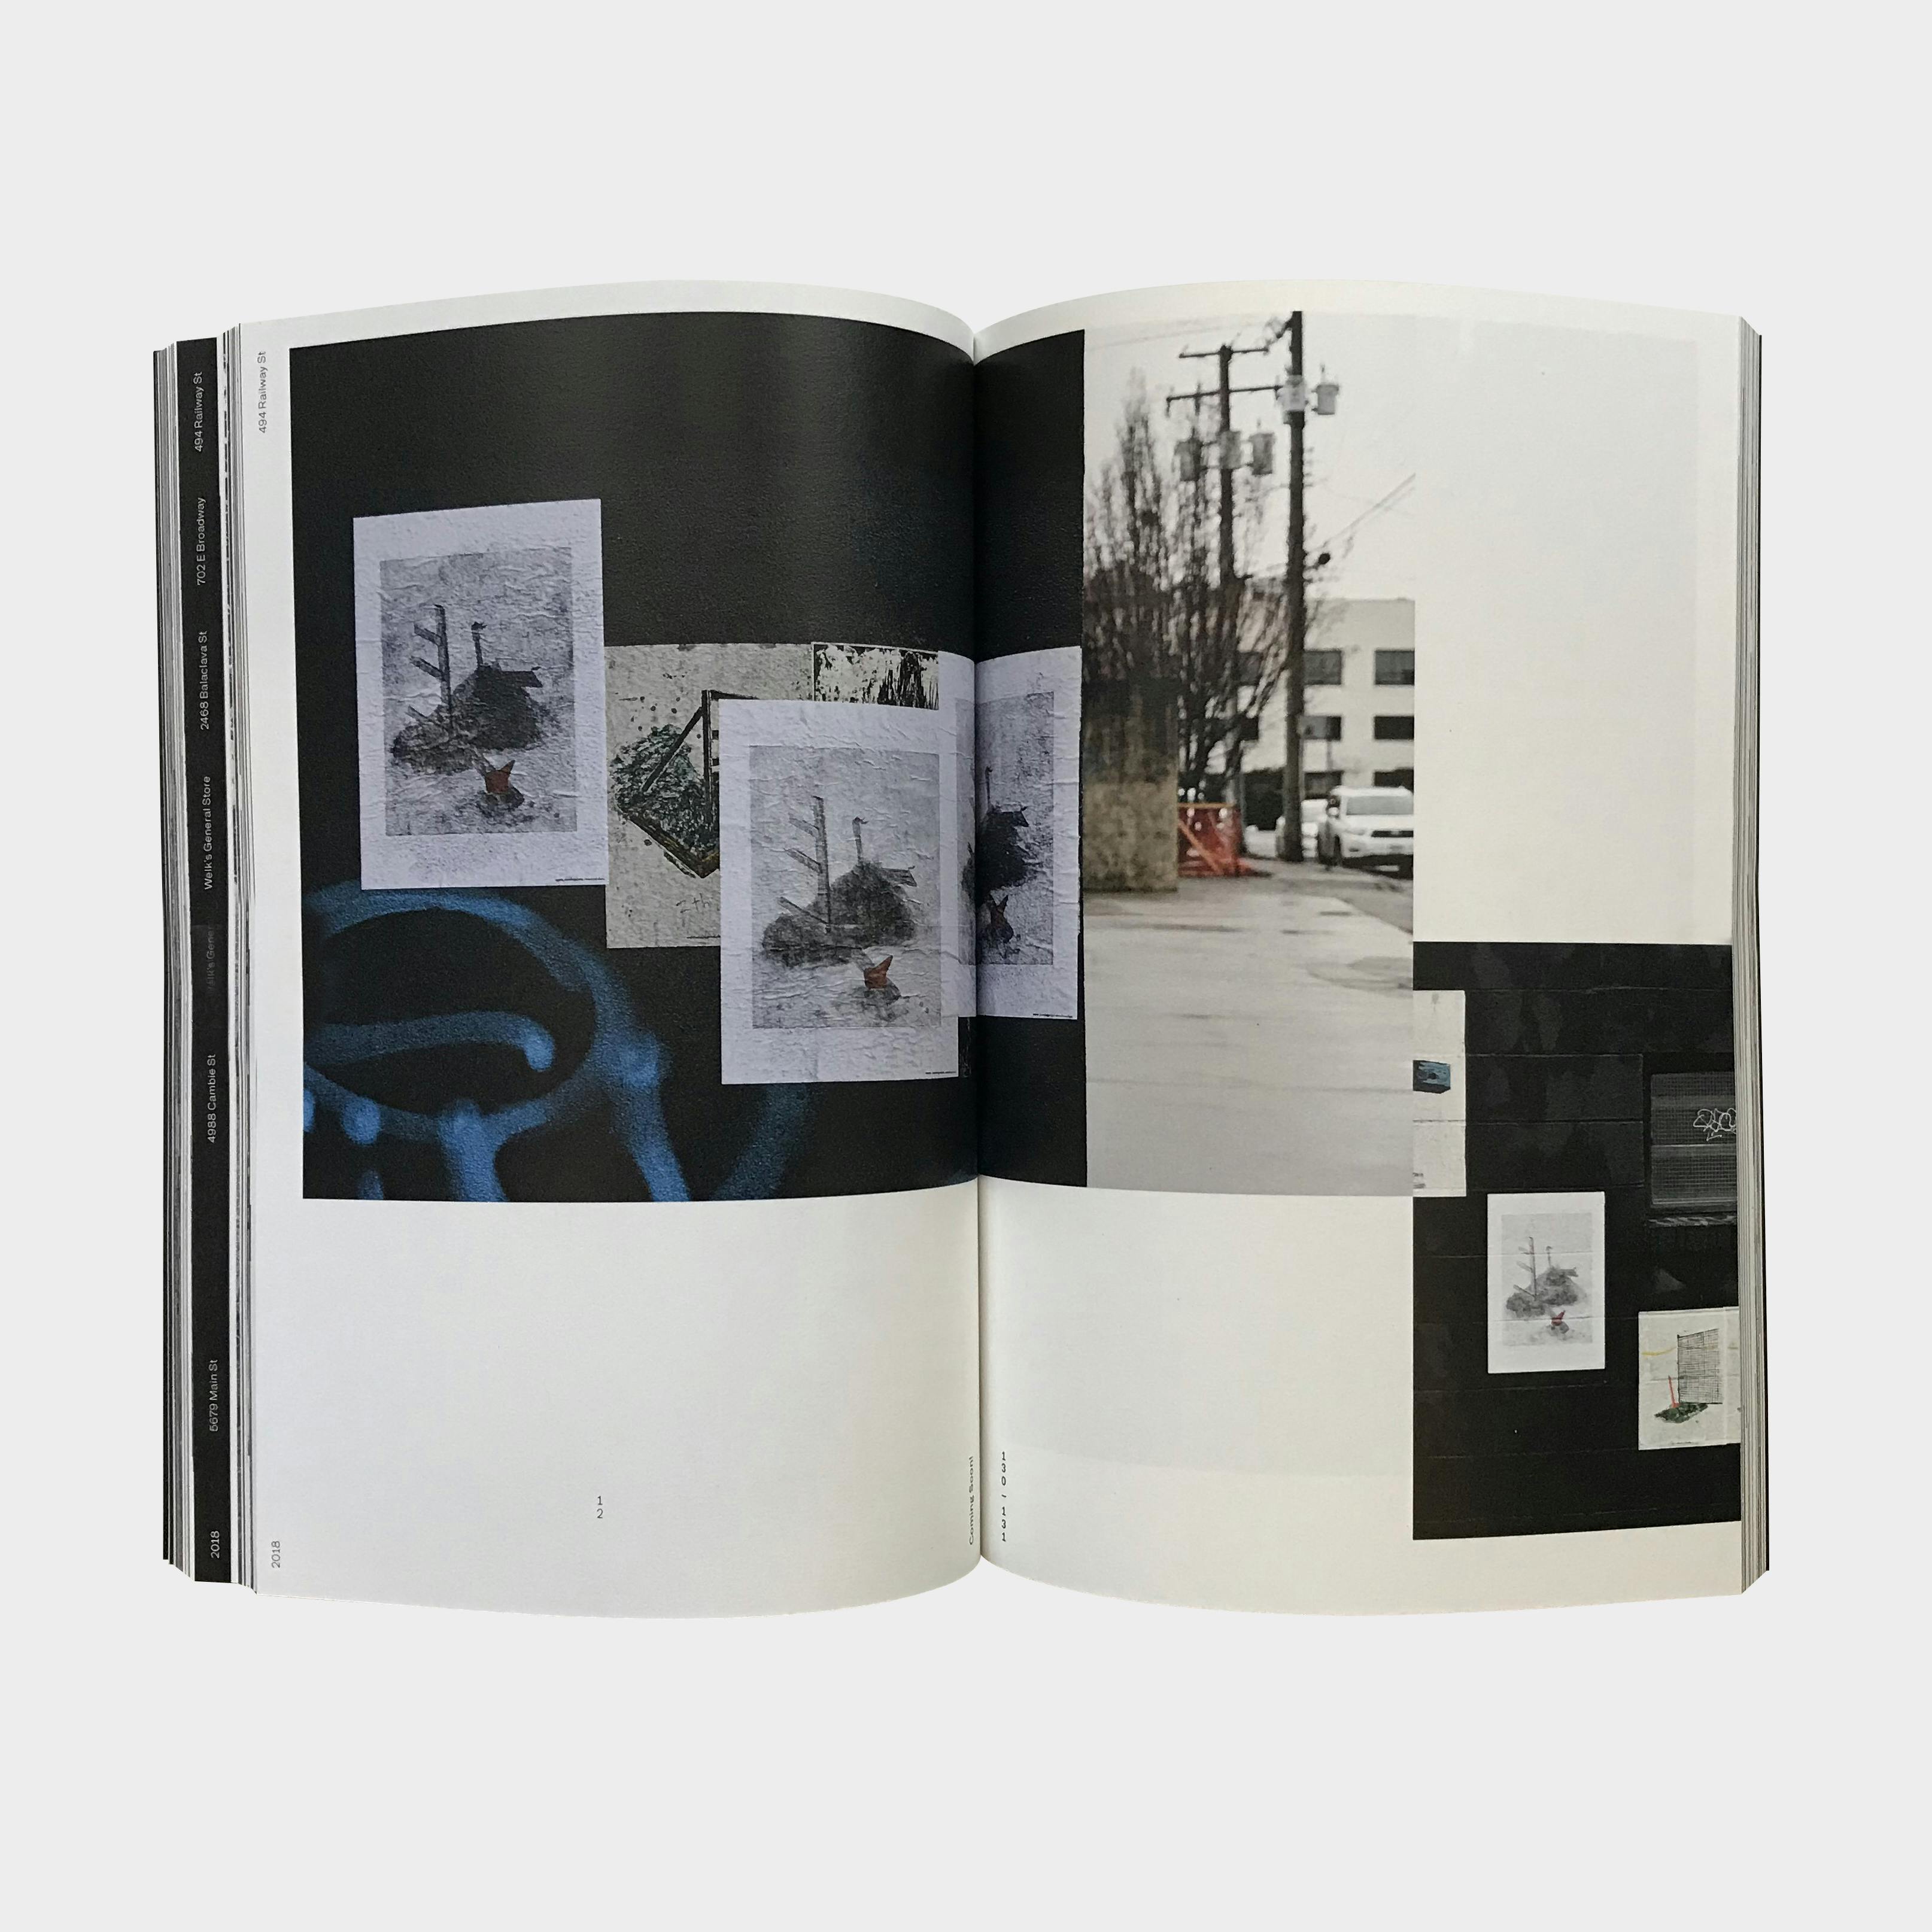 An image of an open page inside Diyan Achjadi's book, titled Coming Soon! Two photographs recording Achjadi's poster projects in the city are printed on the pages. 